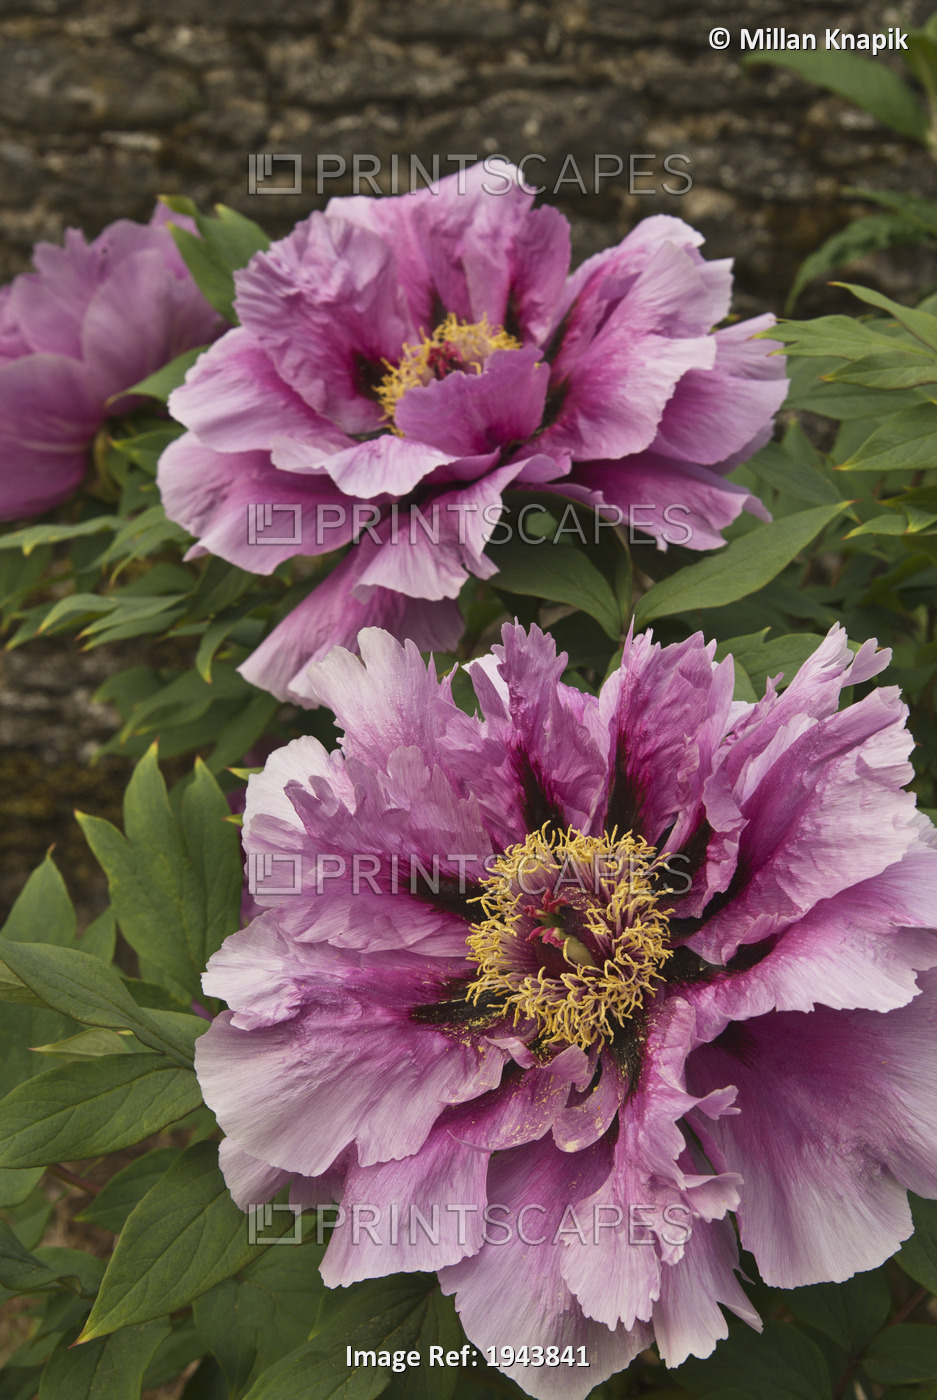 Flowers With Large Pink Petals; Thomastown, County Kilkenny, Ireland